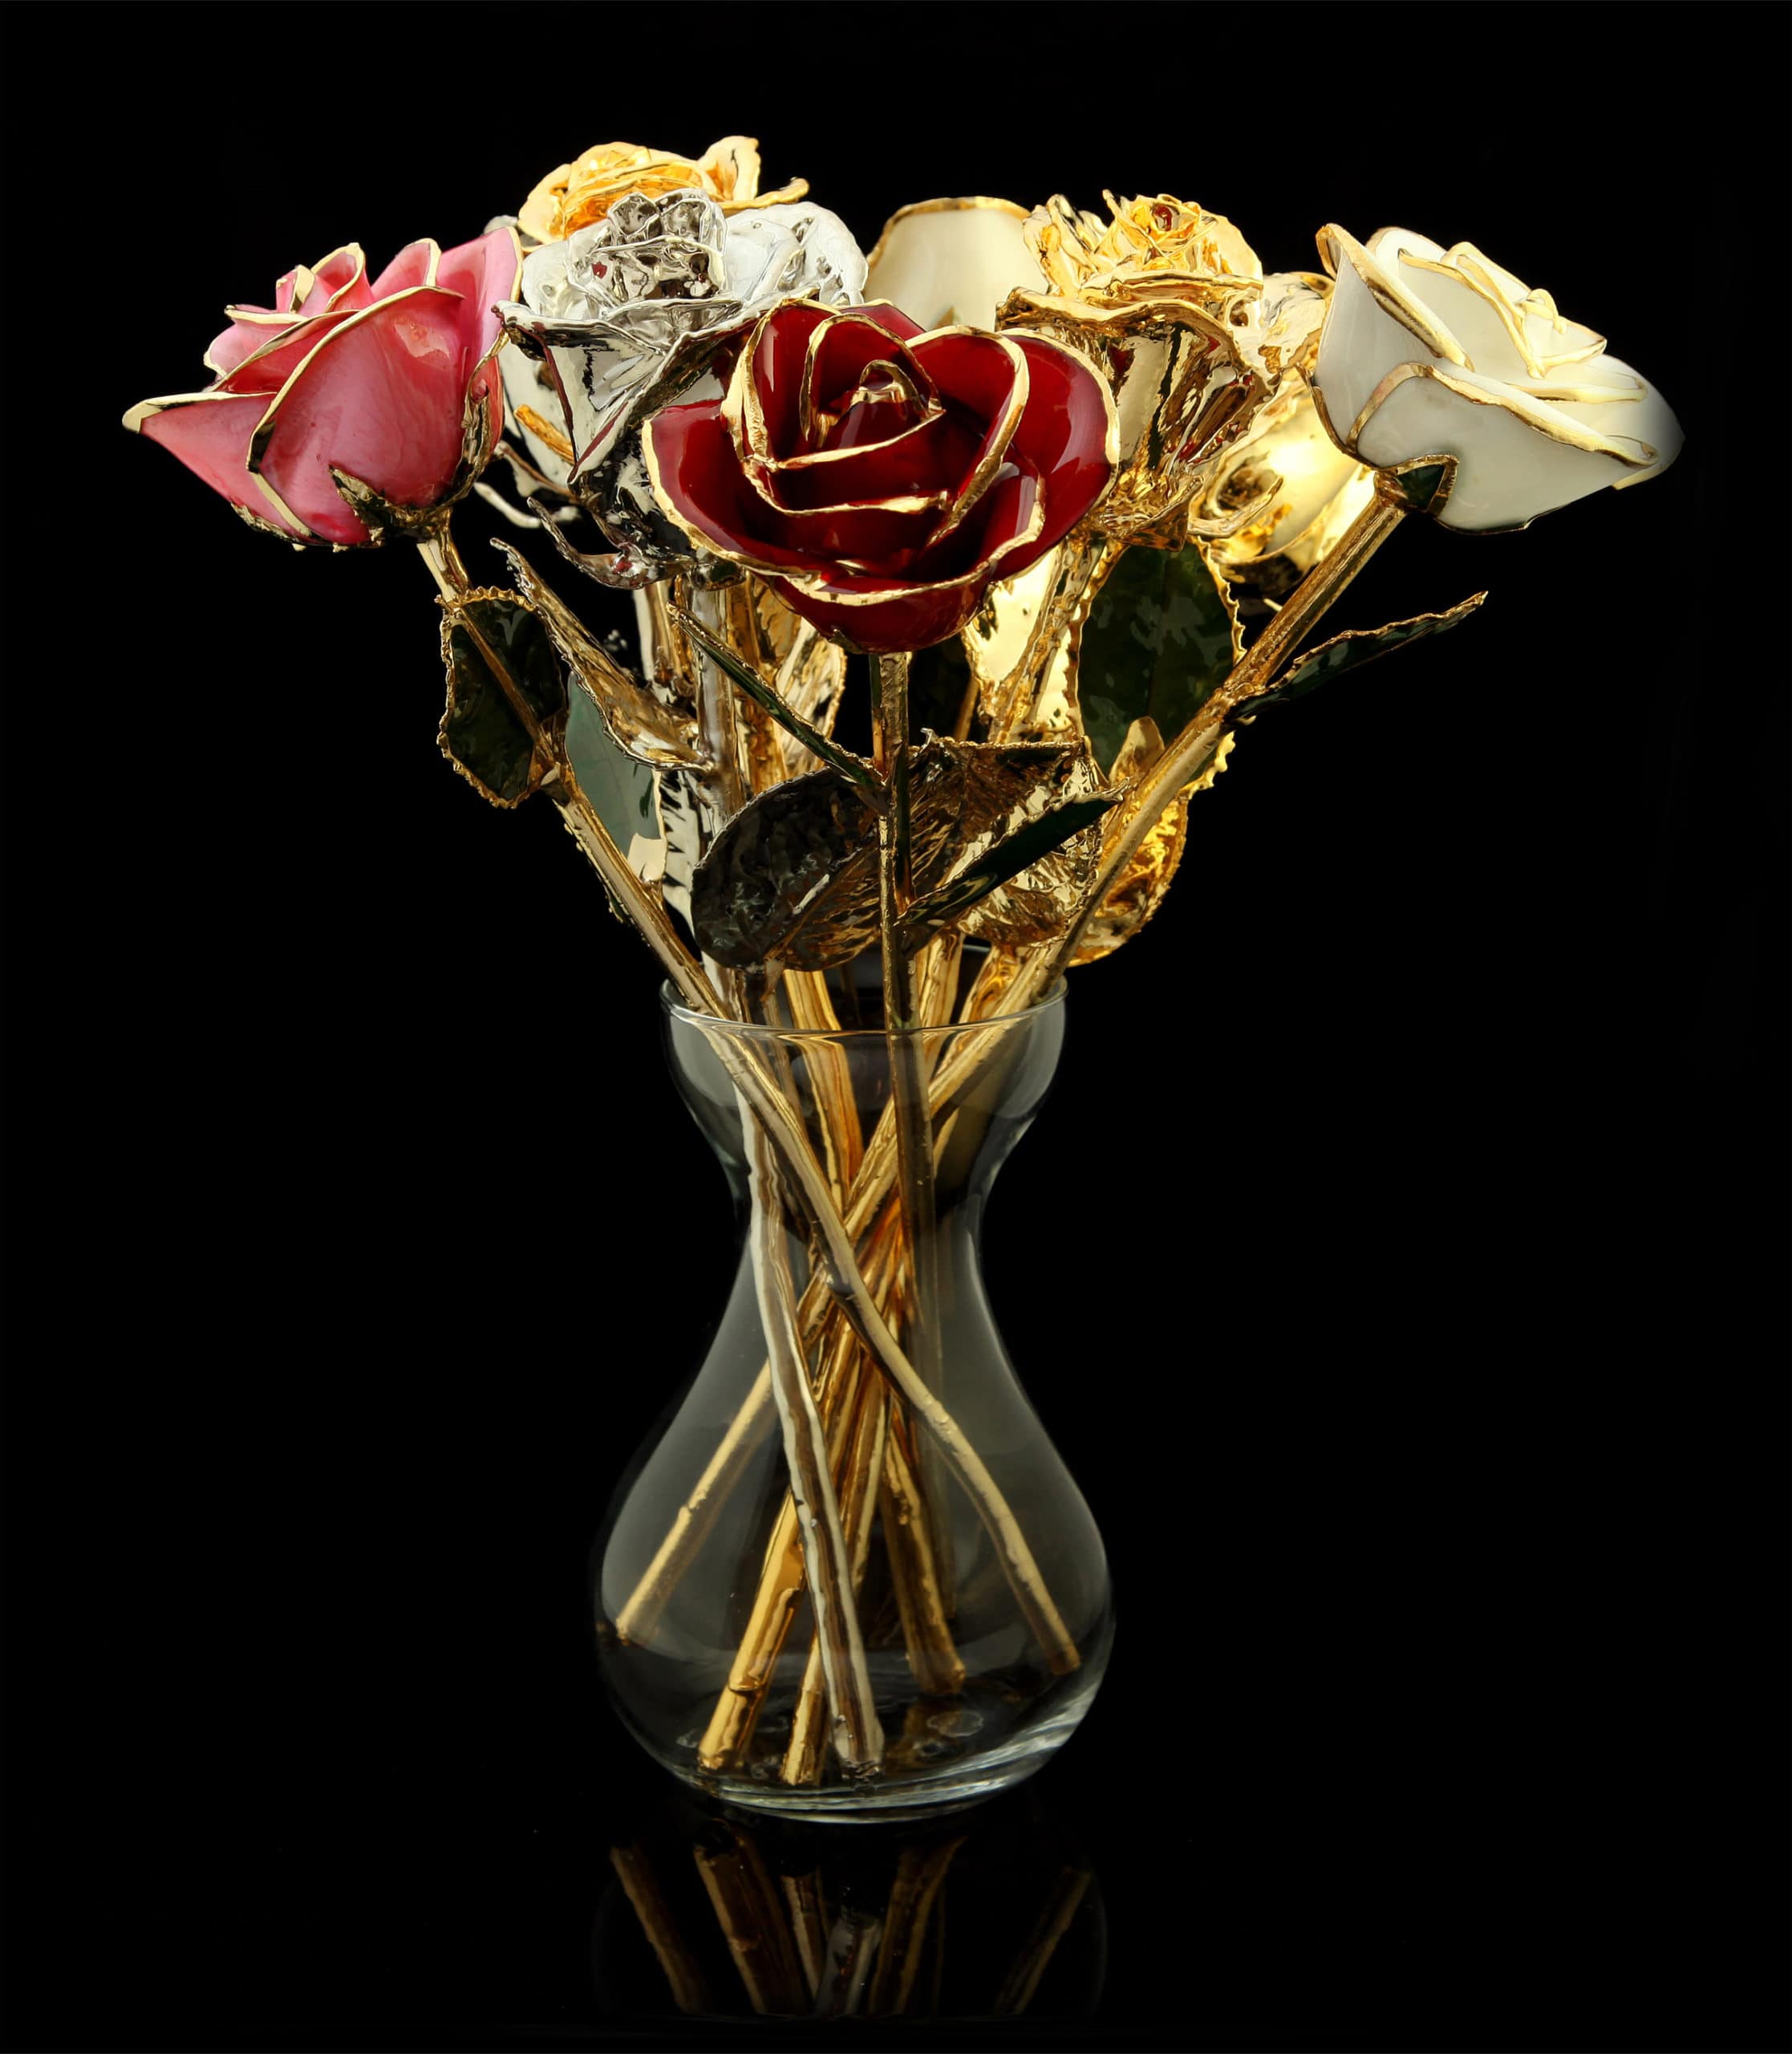 Gold Roses Luxury Gifts